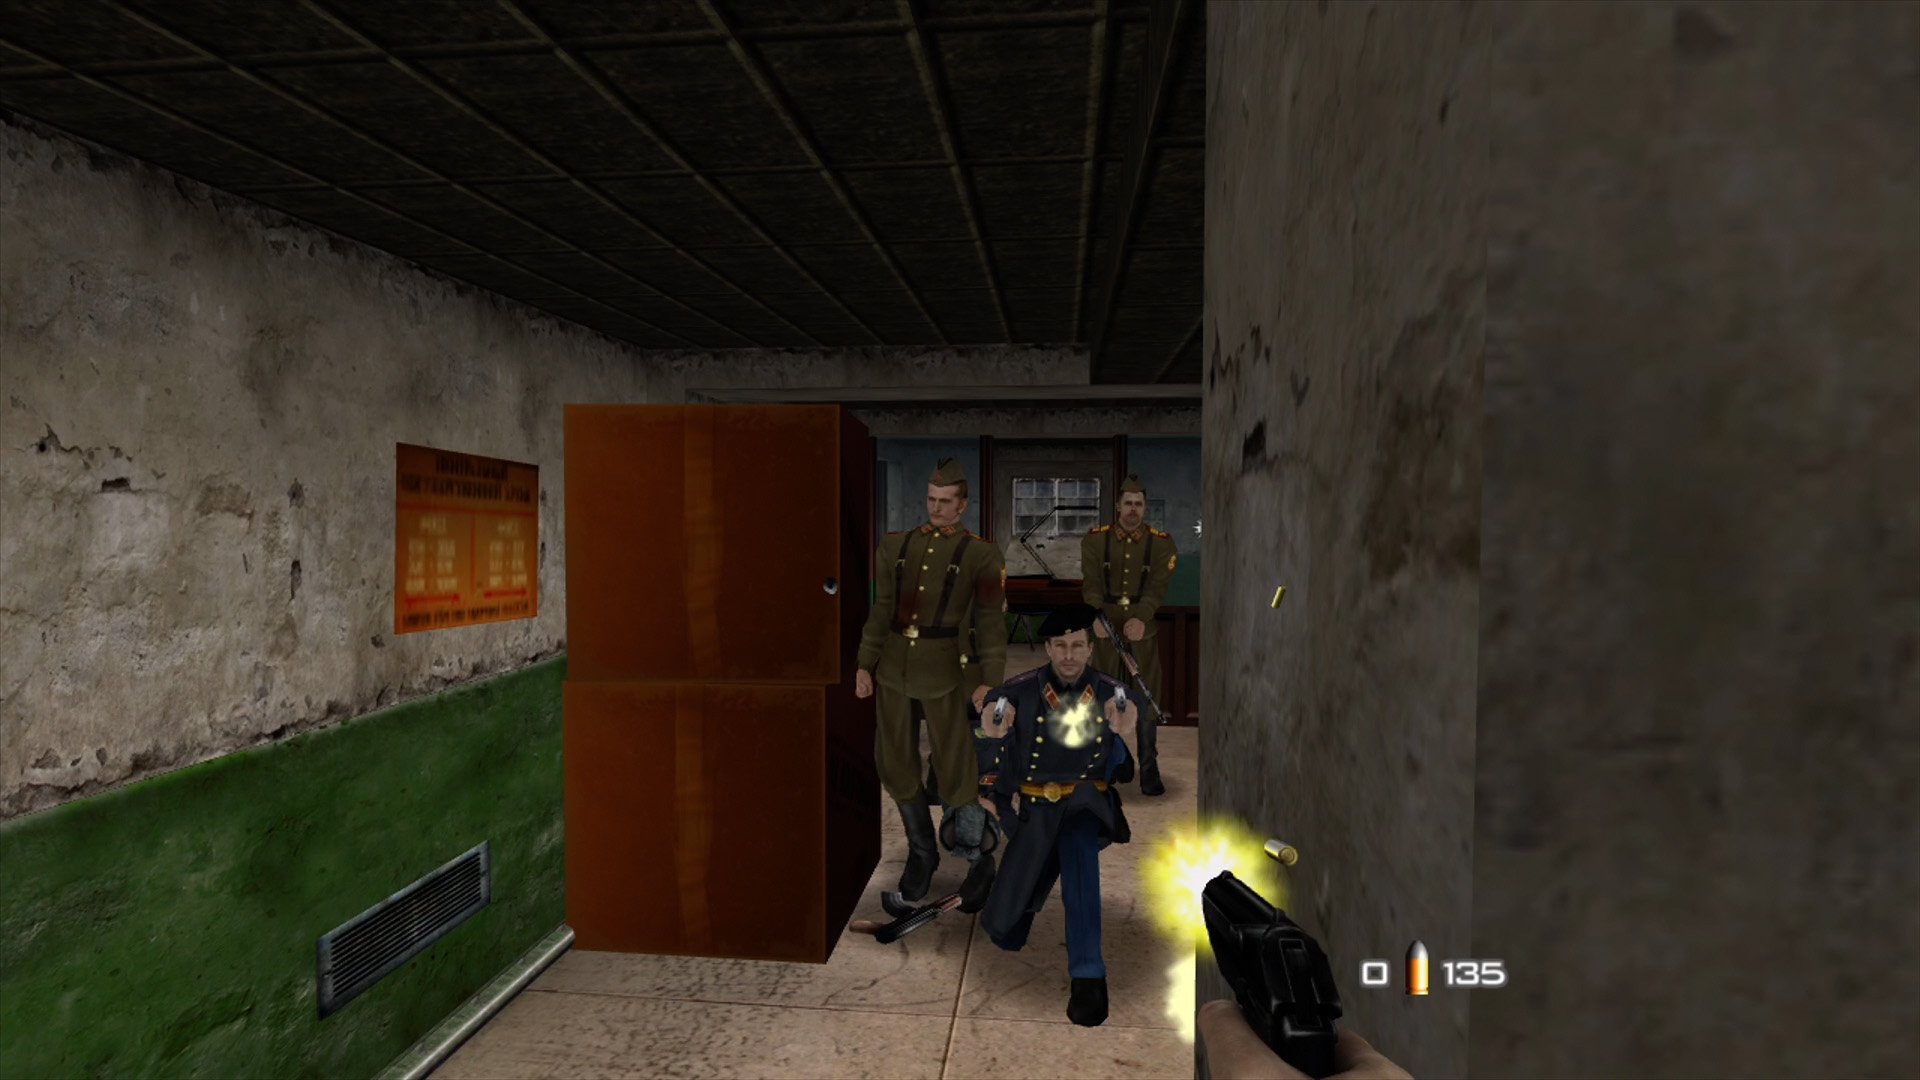 Canceled Xbox 360 GoldenEye remaster has been leaked online